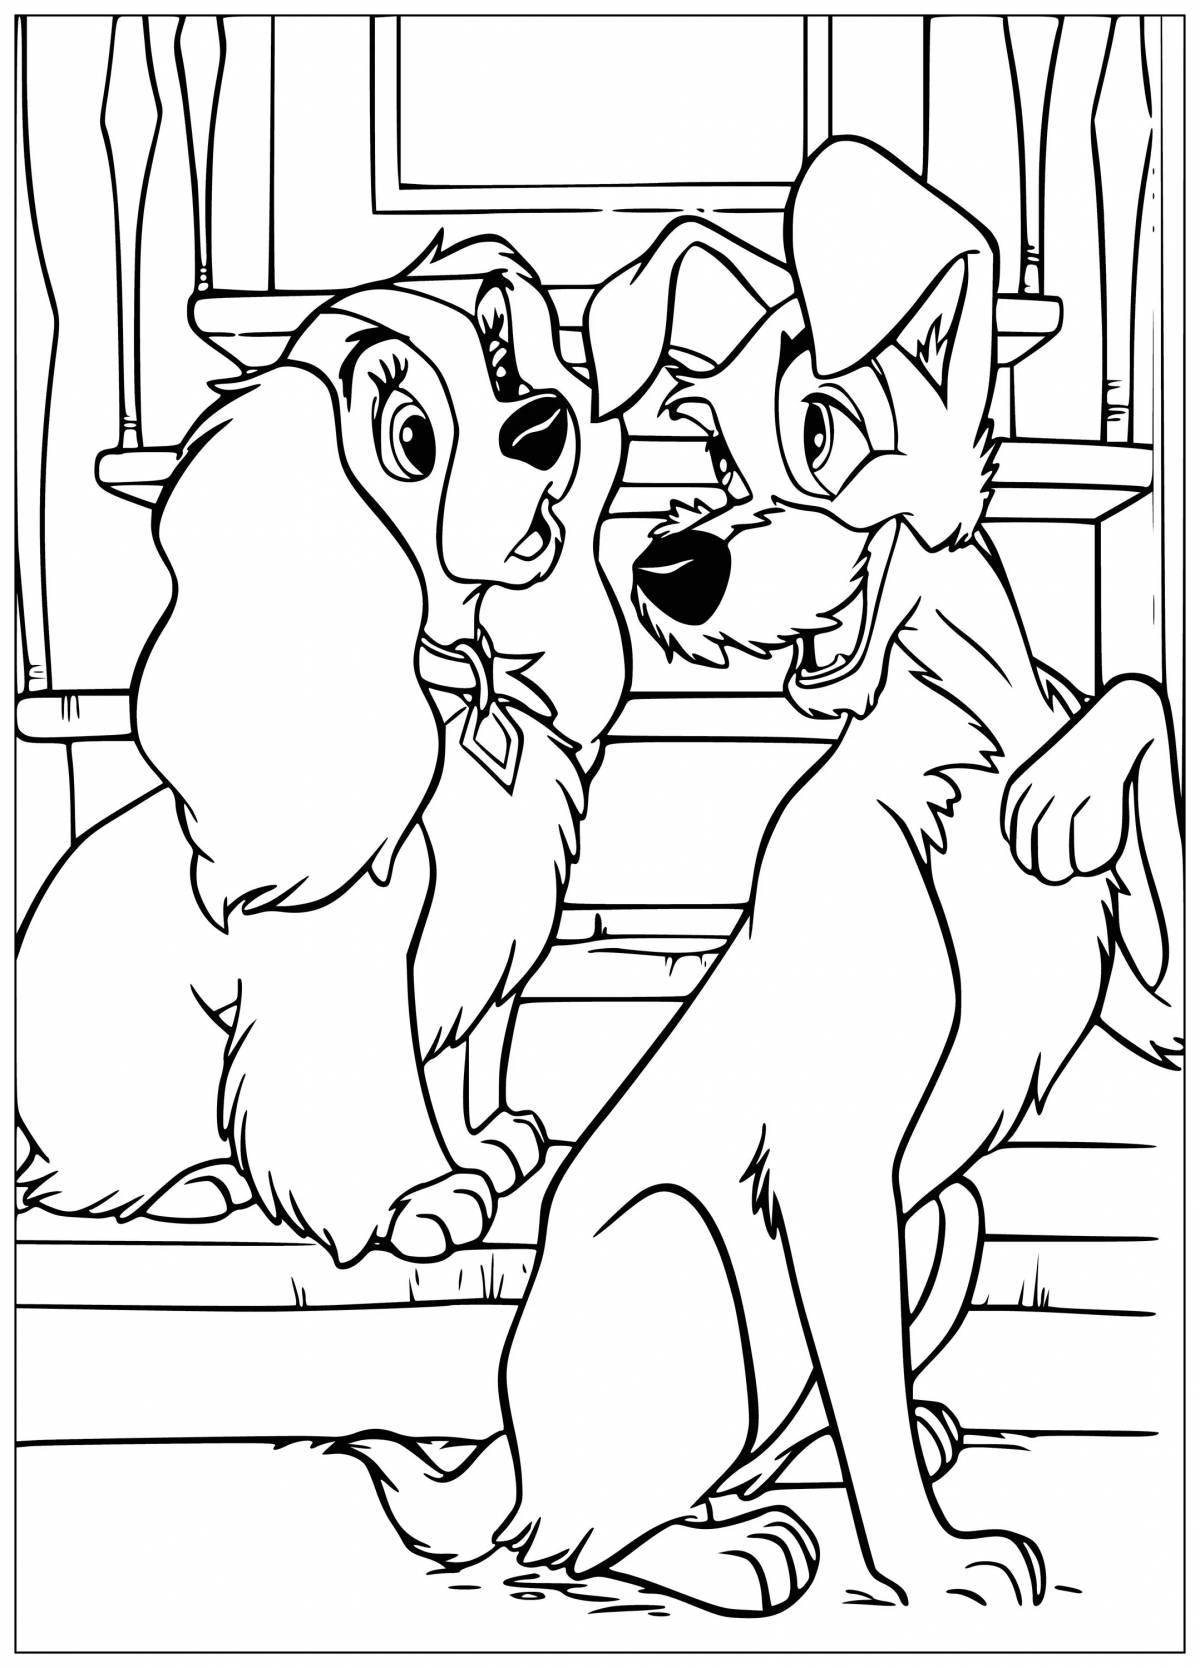 Funny fox and dog coloring book